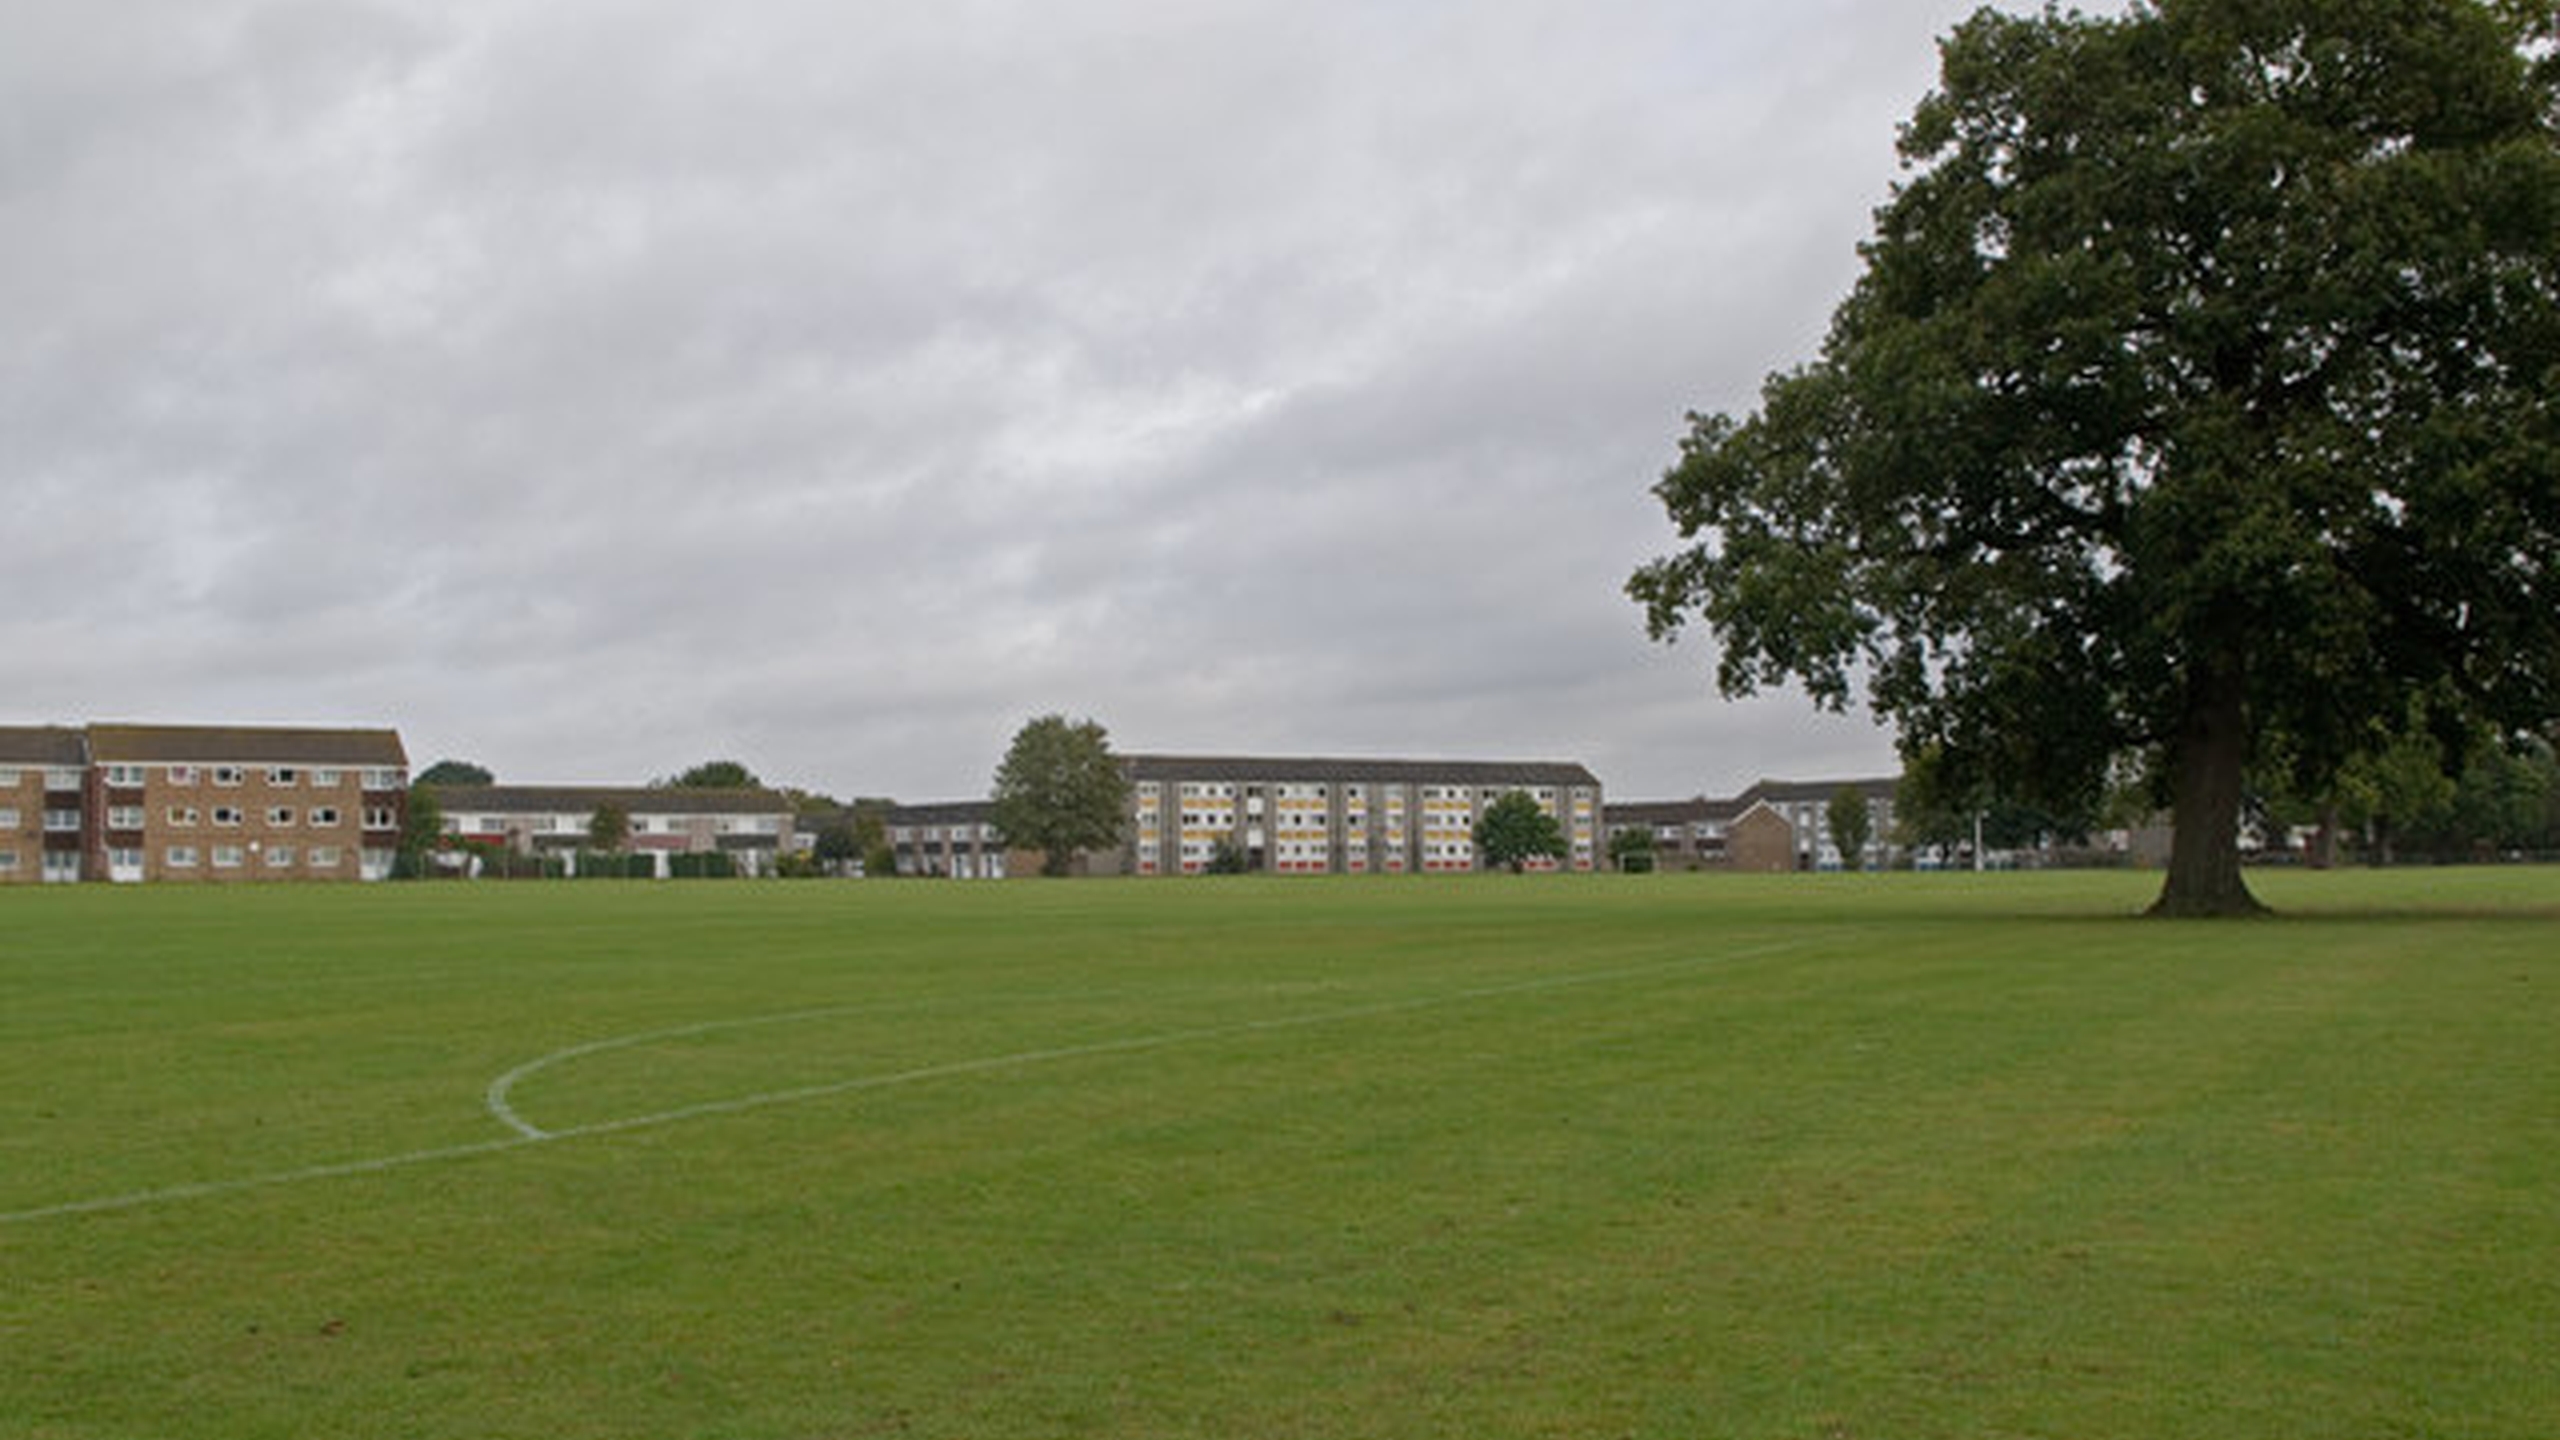 A hotograph of Court Lodge Playing Fields, Horley. It is a large expanse of green grass, with some low buildings lining the horizon. To the right of the frame is a mature tree in full leaf.